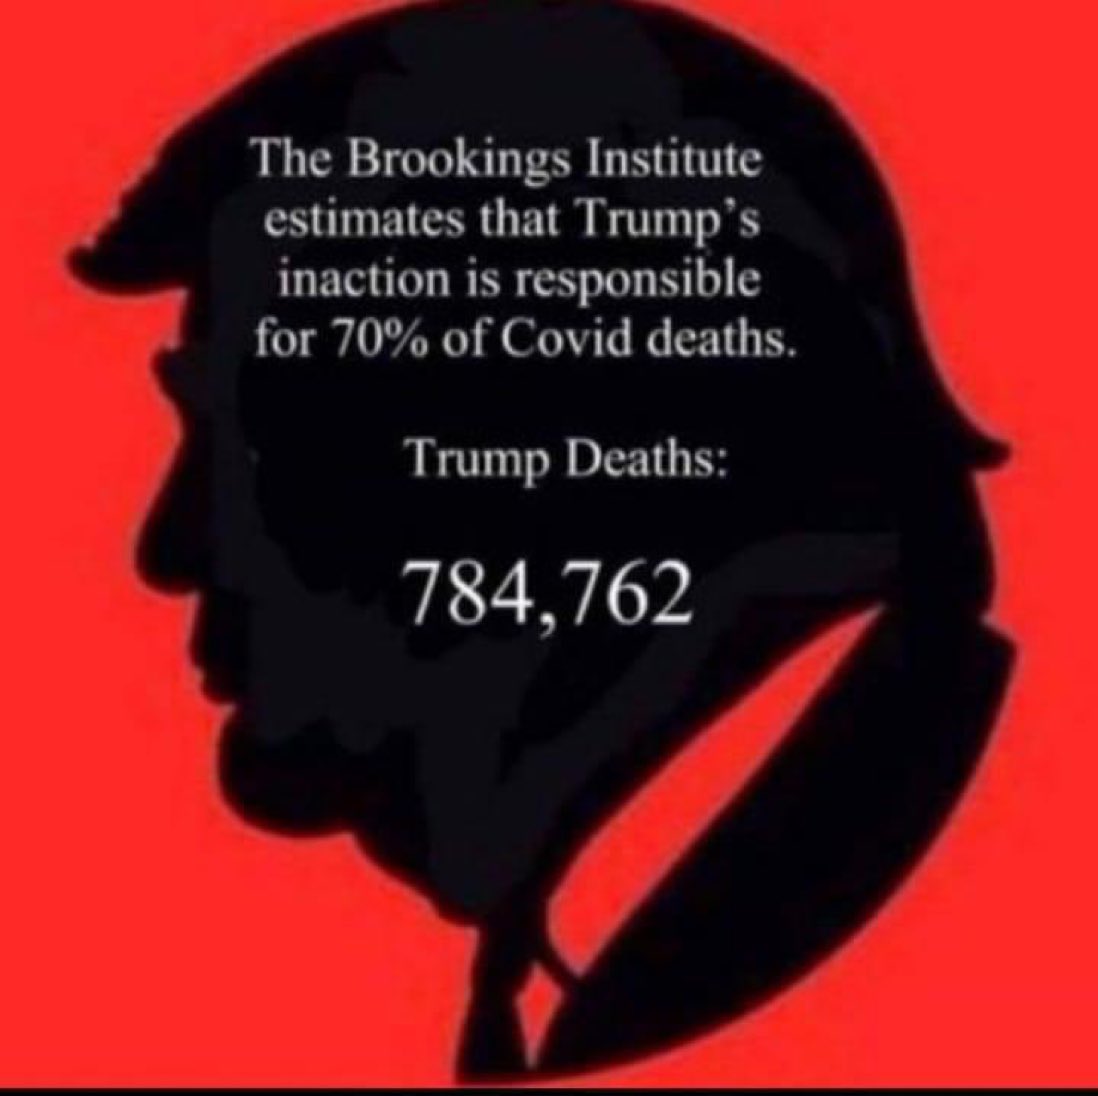 Stupid Donald Trump’s incompetence caused over 780,000 unnecessary Covid-19 deaths. And the GOP wants him back in office!